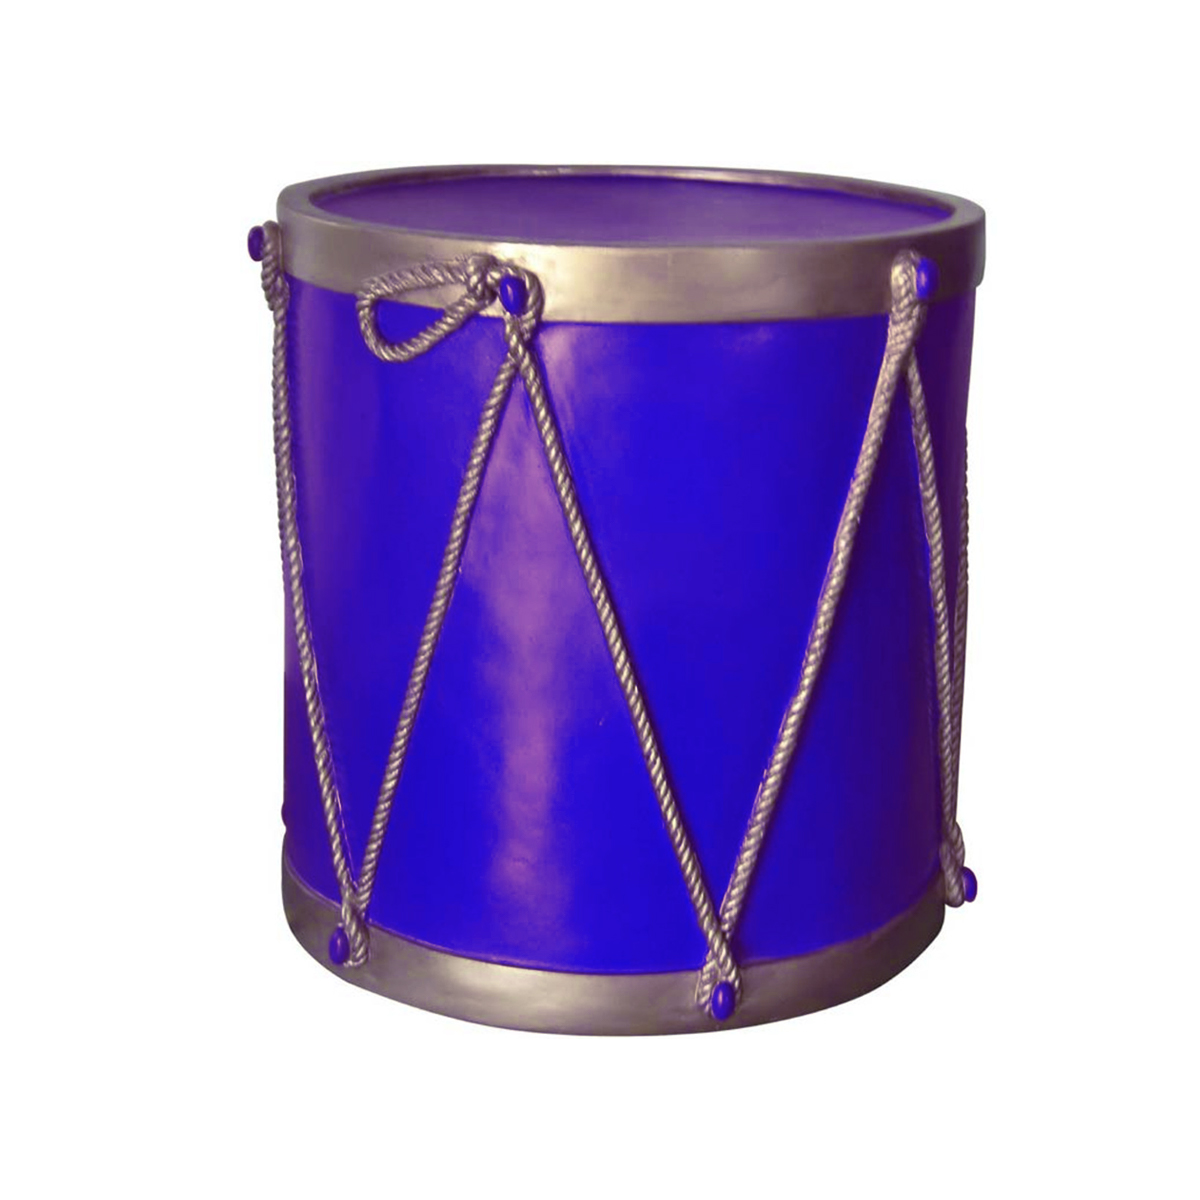 Blue and Metallic Silver Drum - 2ft Tall